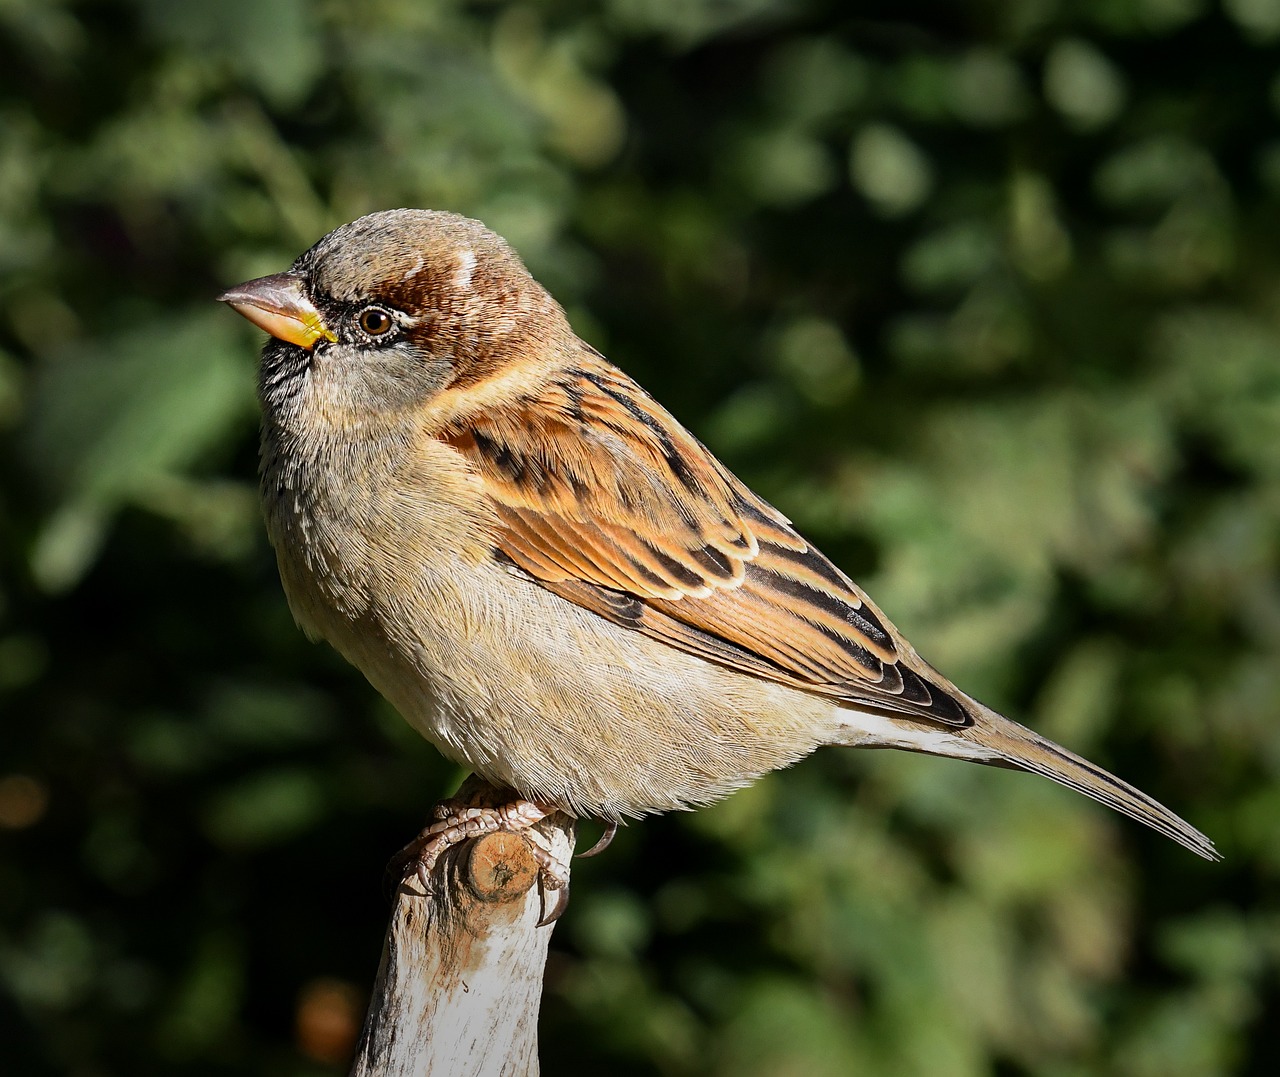 a small bird sitting on top of a wooden post, a portrait, by Peter Churcher, pixabay, arabesque, hyperrealistic sparrows, 1 female, side view close up of a gaunt, sprawling